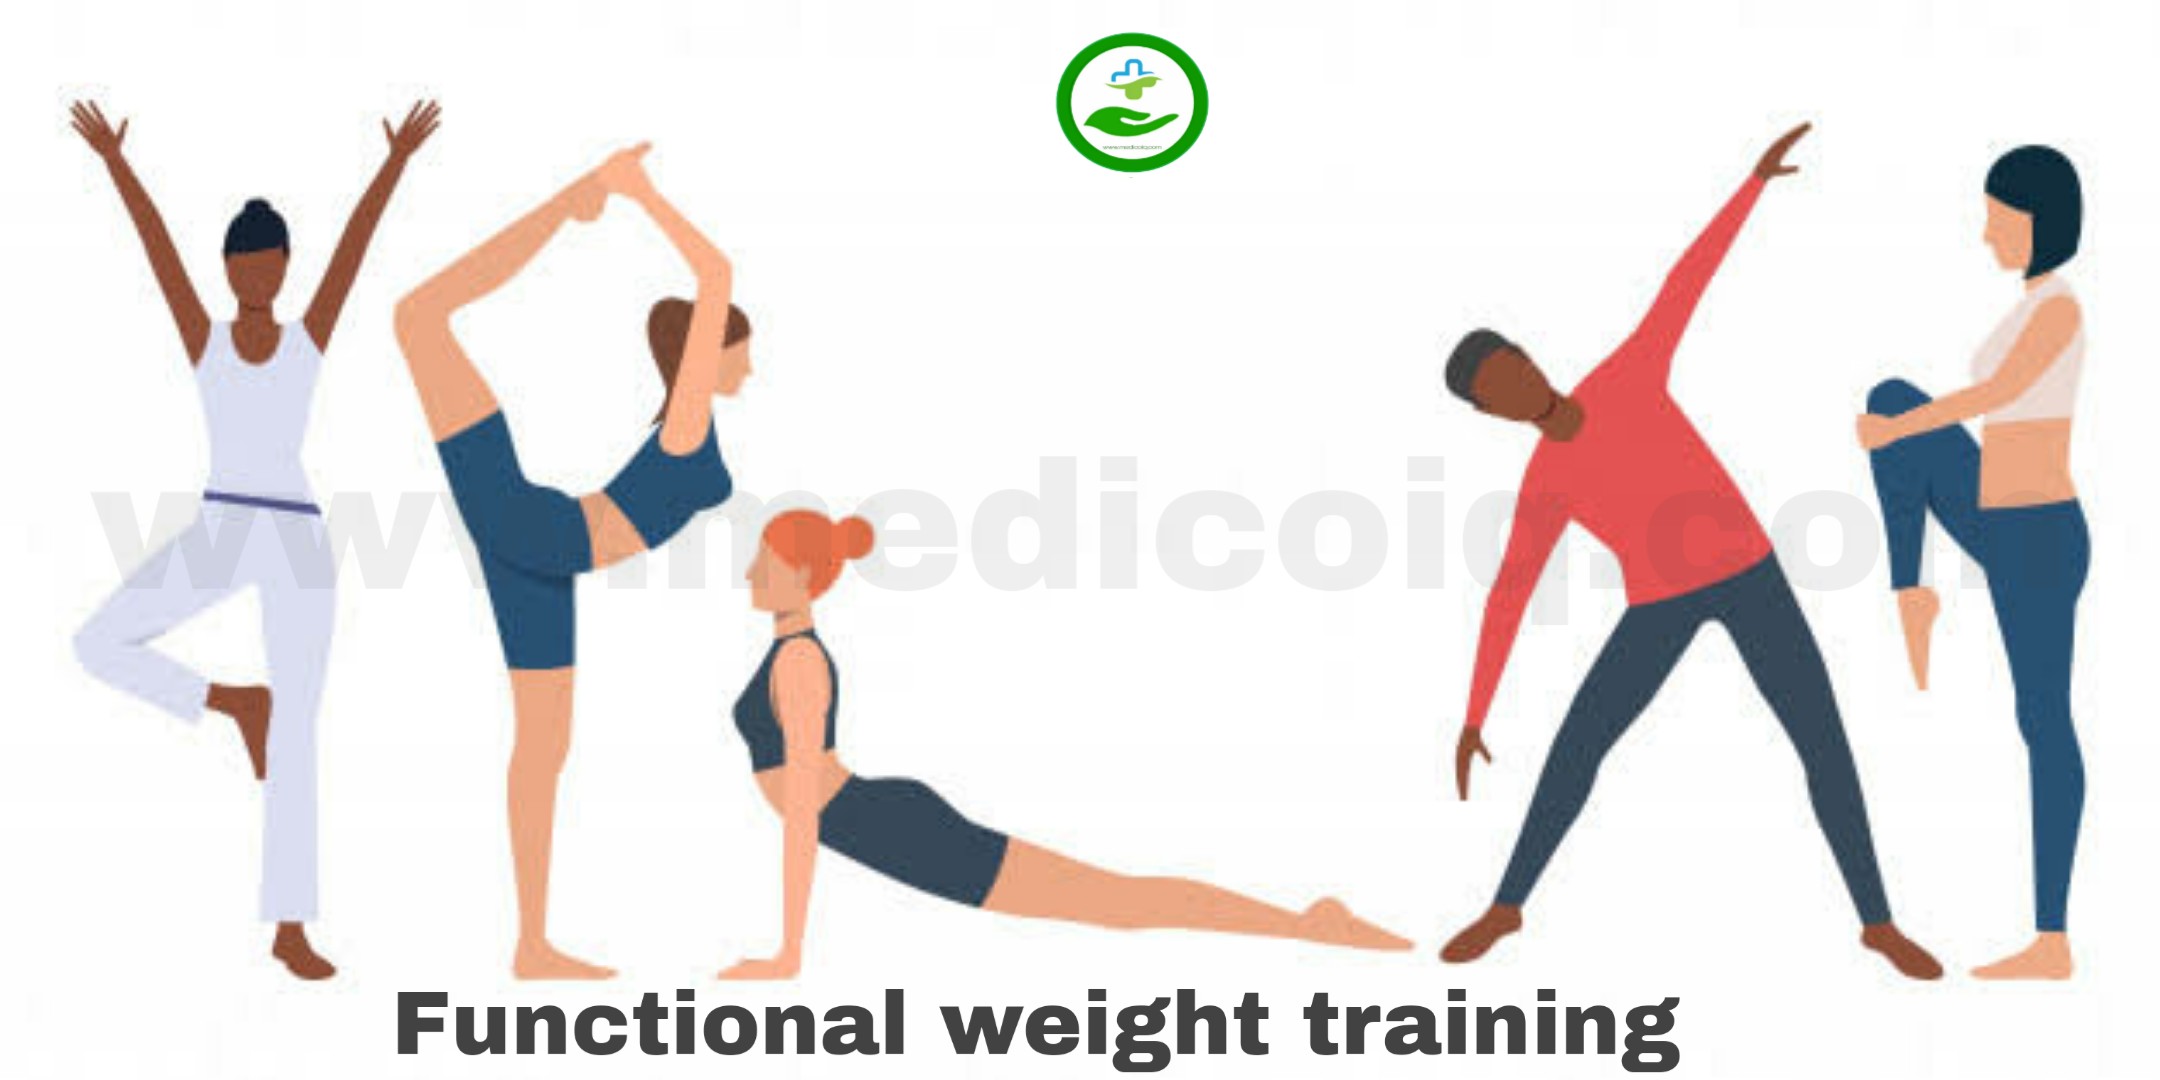 Functional weight training